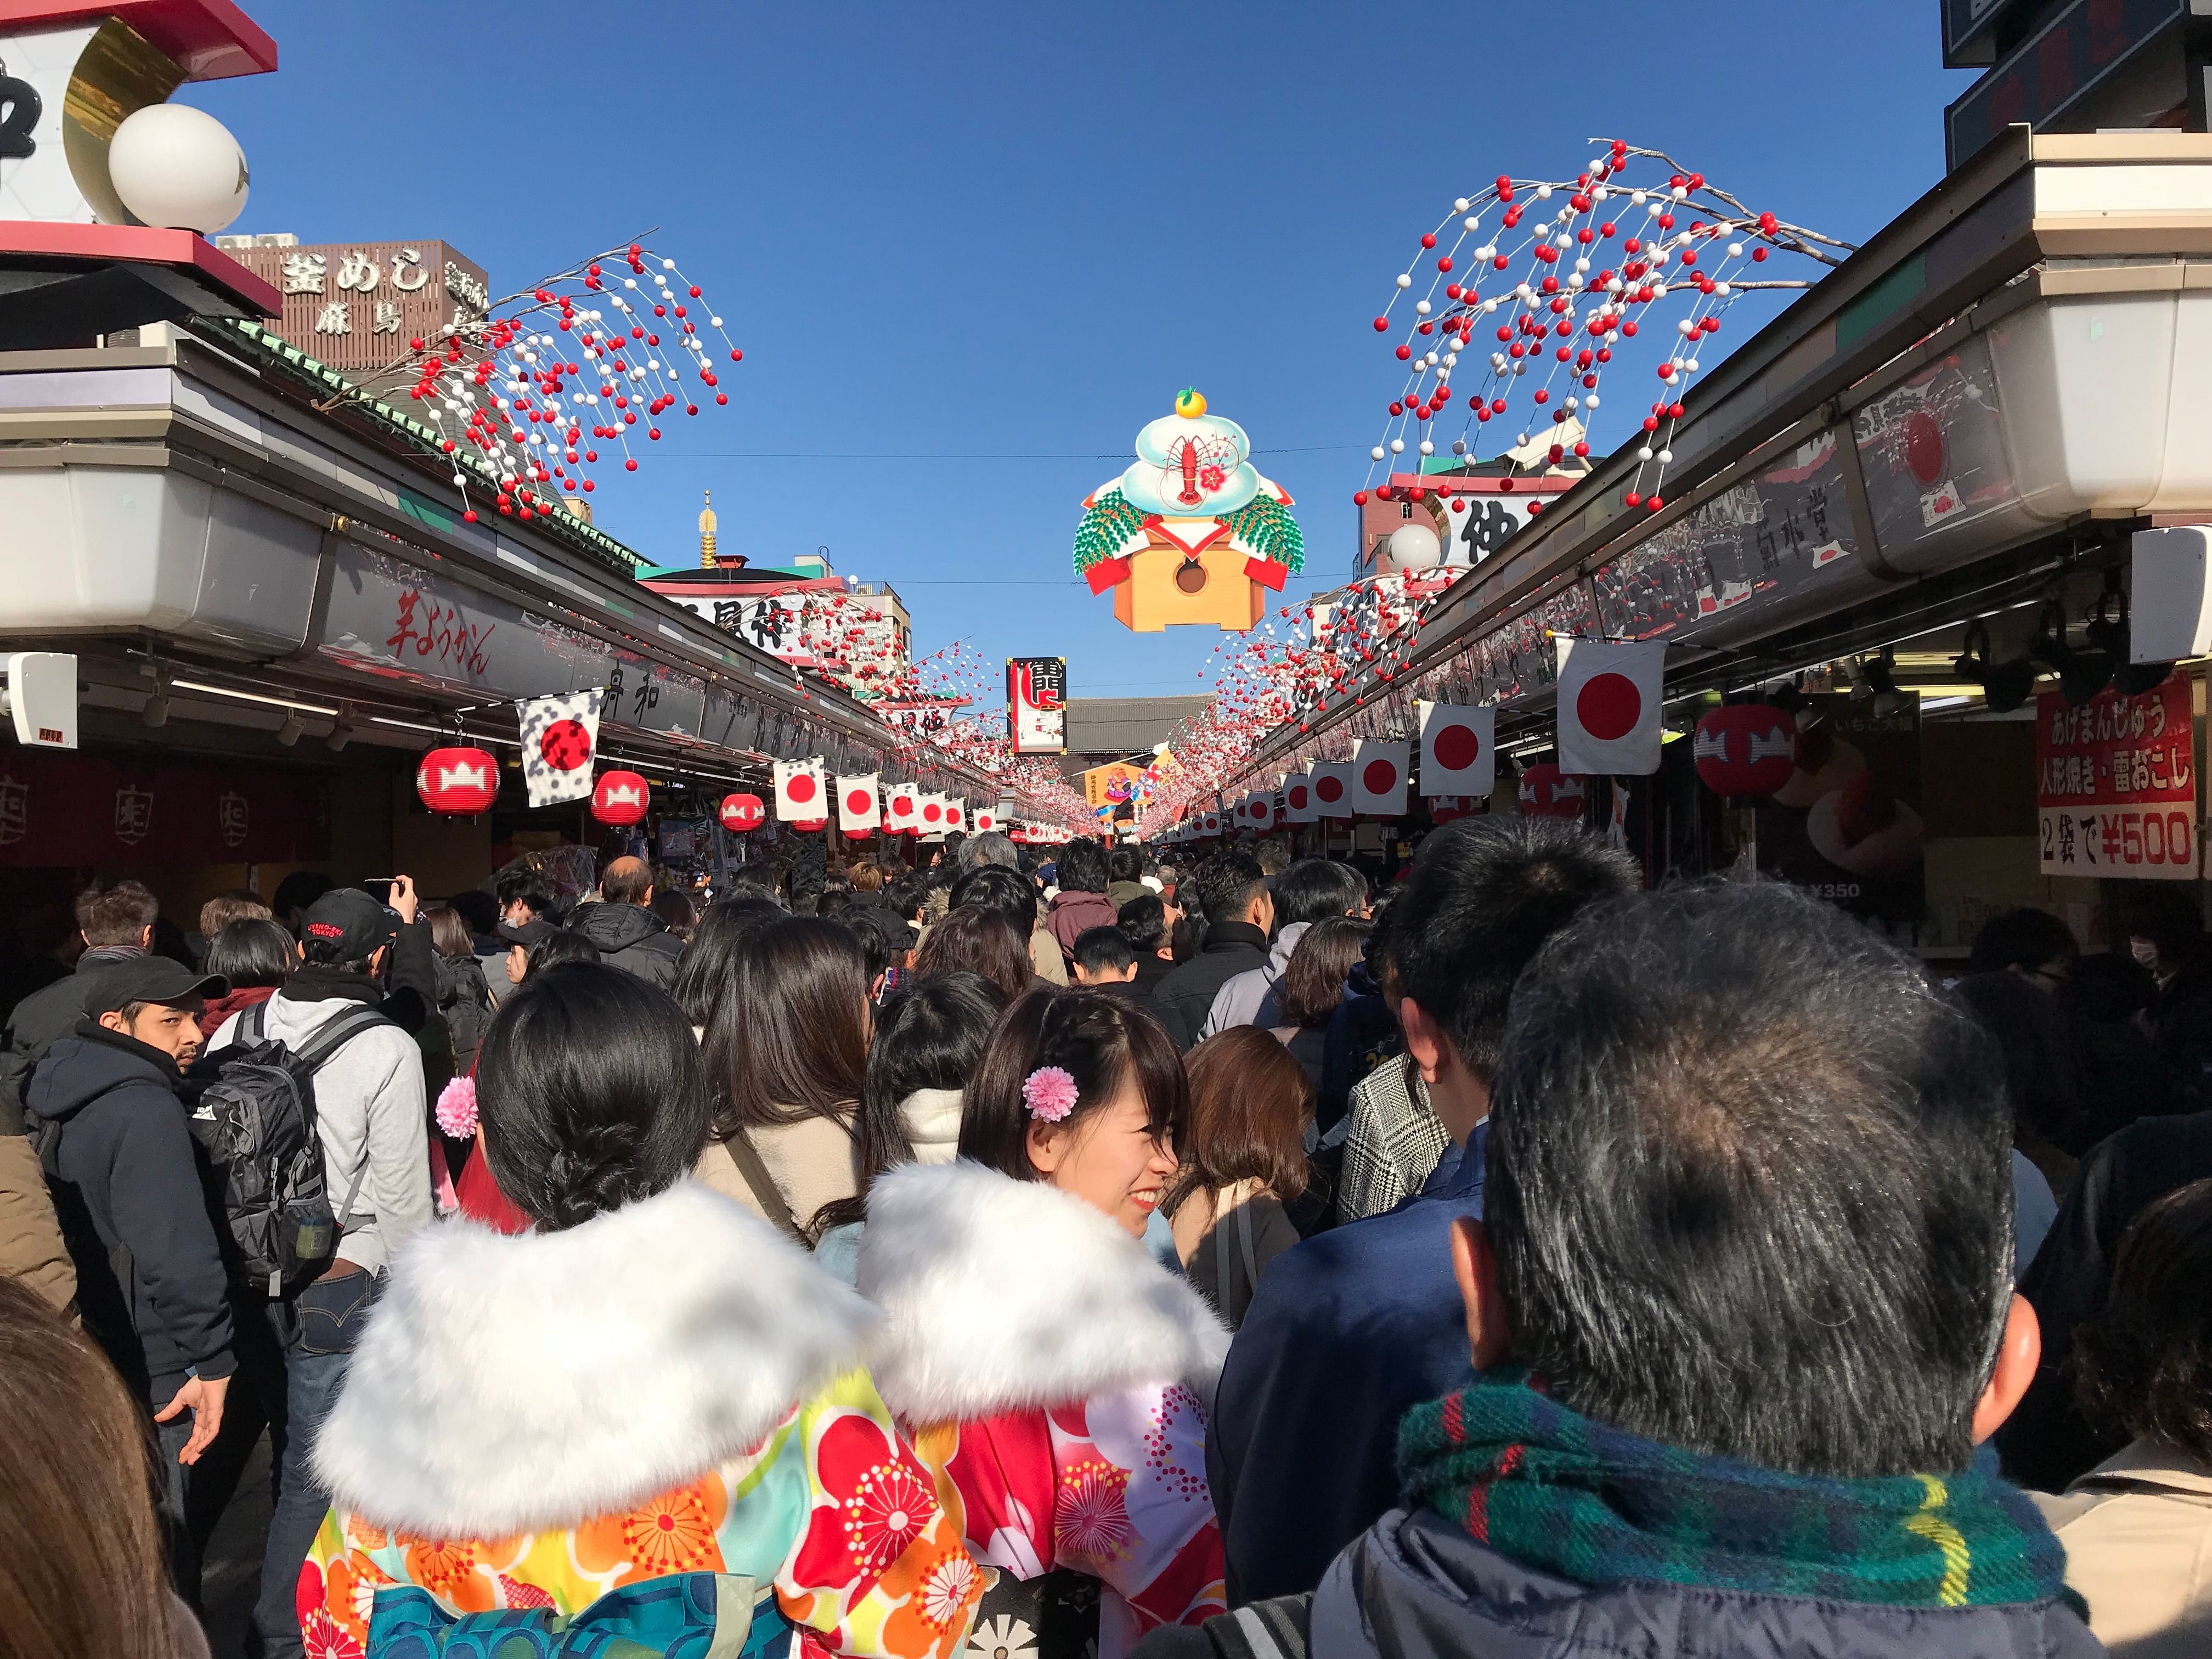 Asakusa: Traditional exquisite lunch after history tour